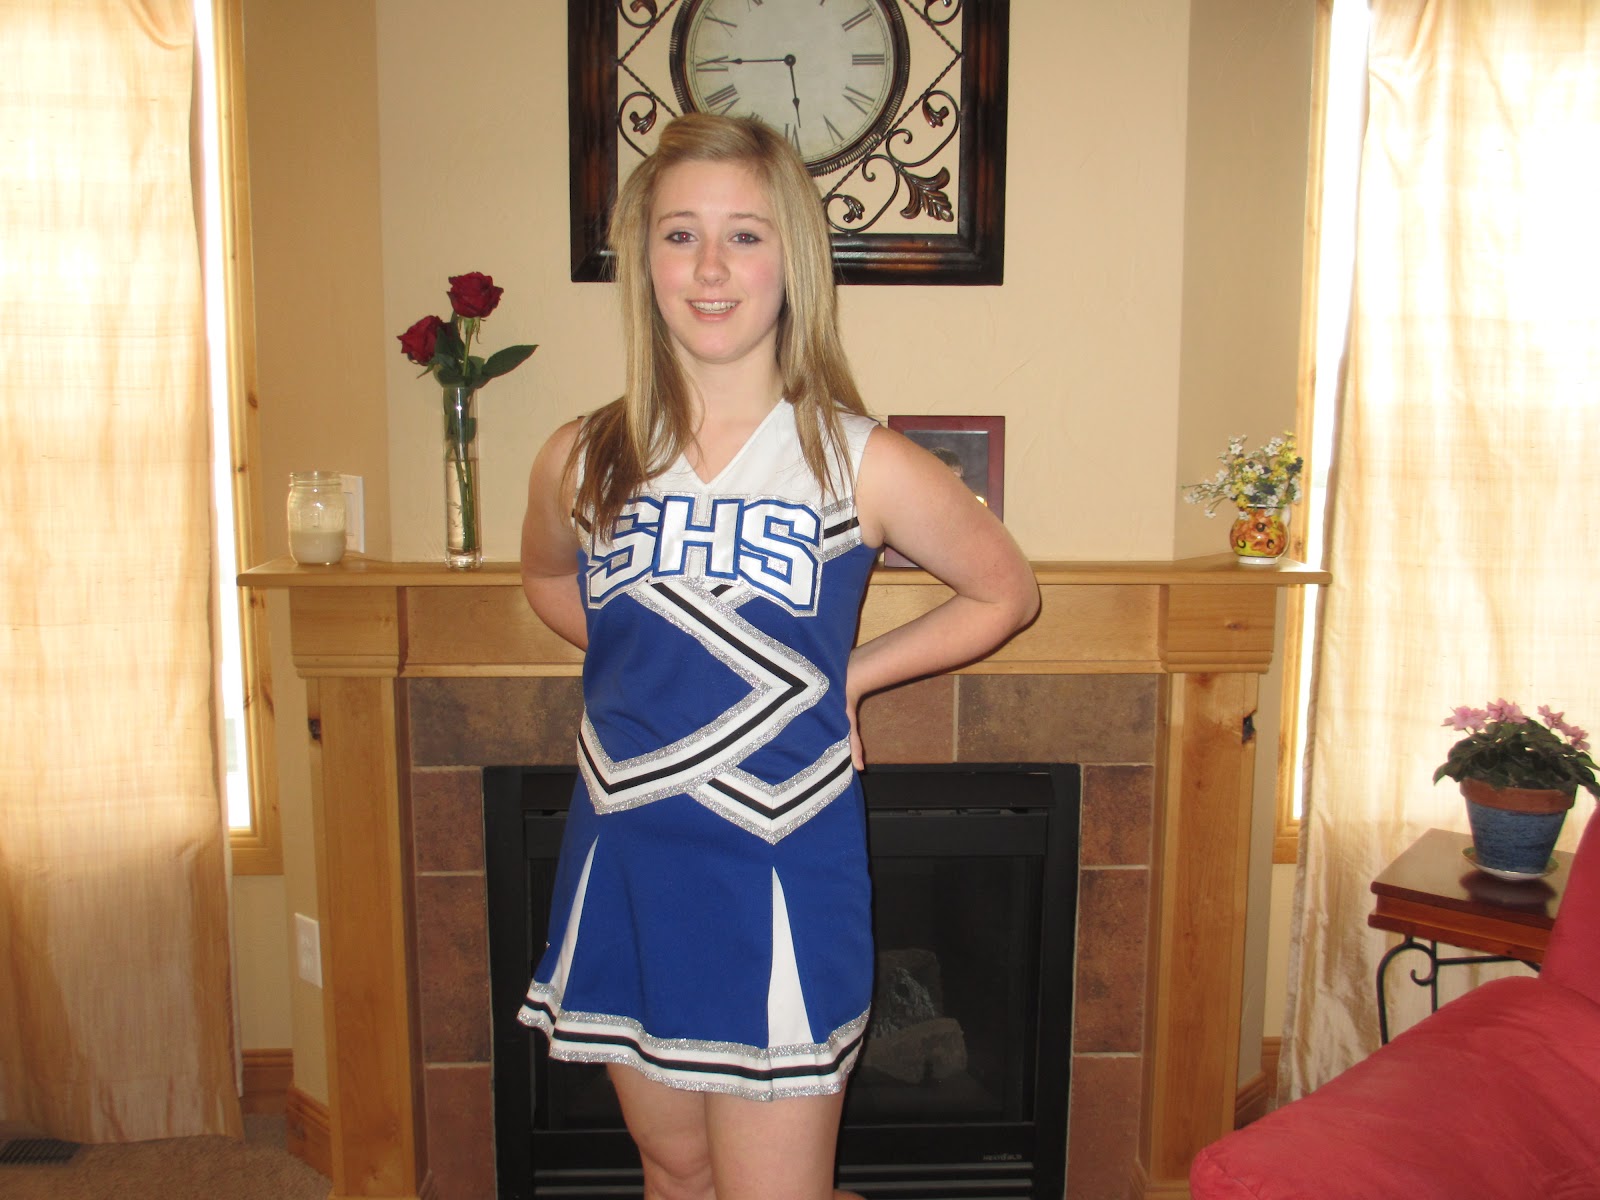 News From Laggeland: Finally! A cheer uniform of her own!